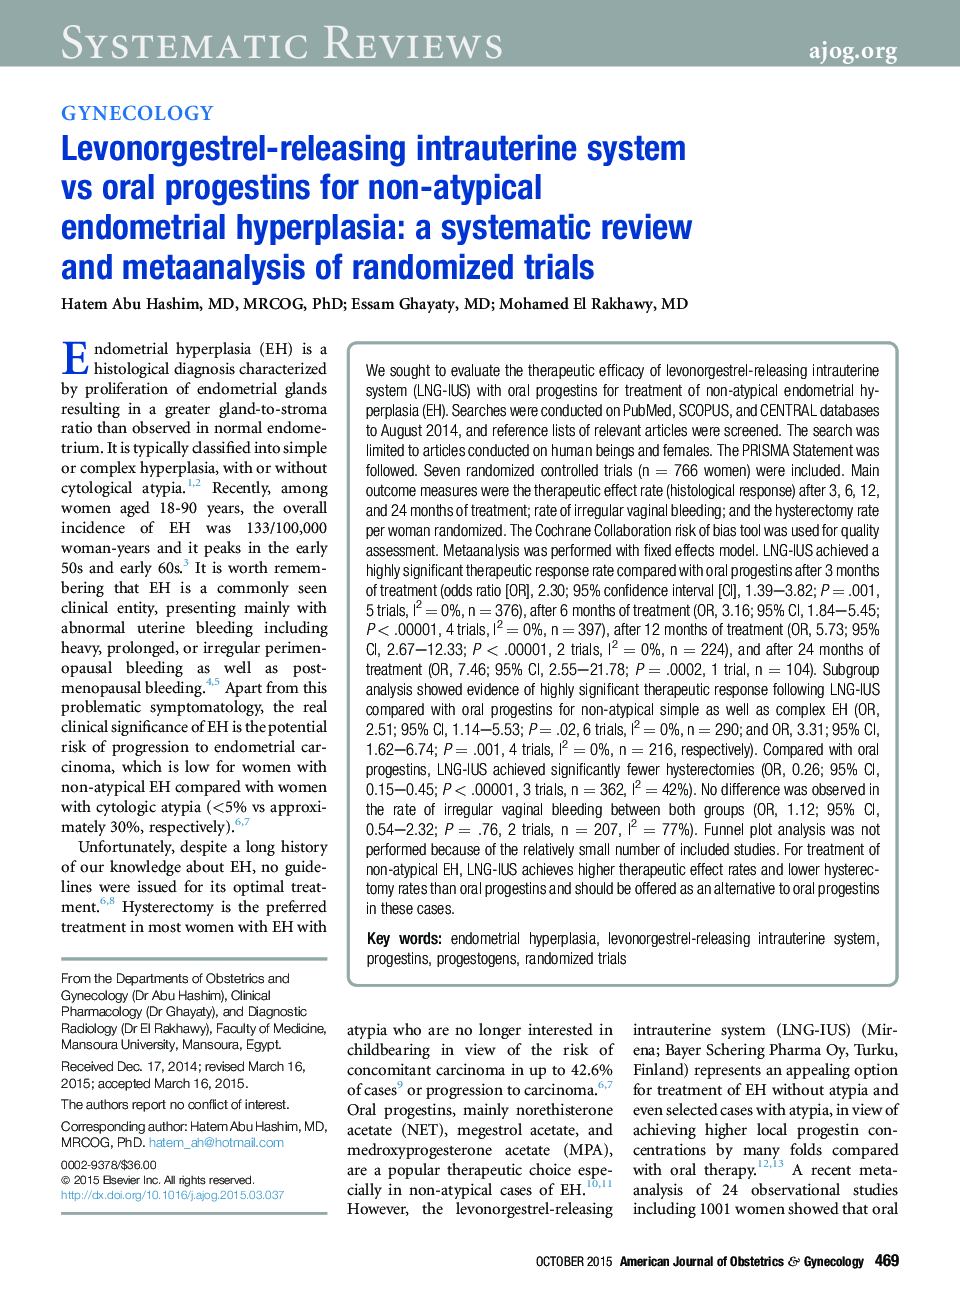 Levonorgestrel-releasing intrauterine system vs oral progestins for non-atypical endometrial hyperplasia: a systematic review and metaanalysis of randomized trials